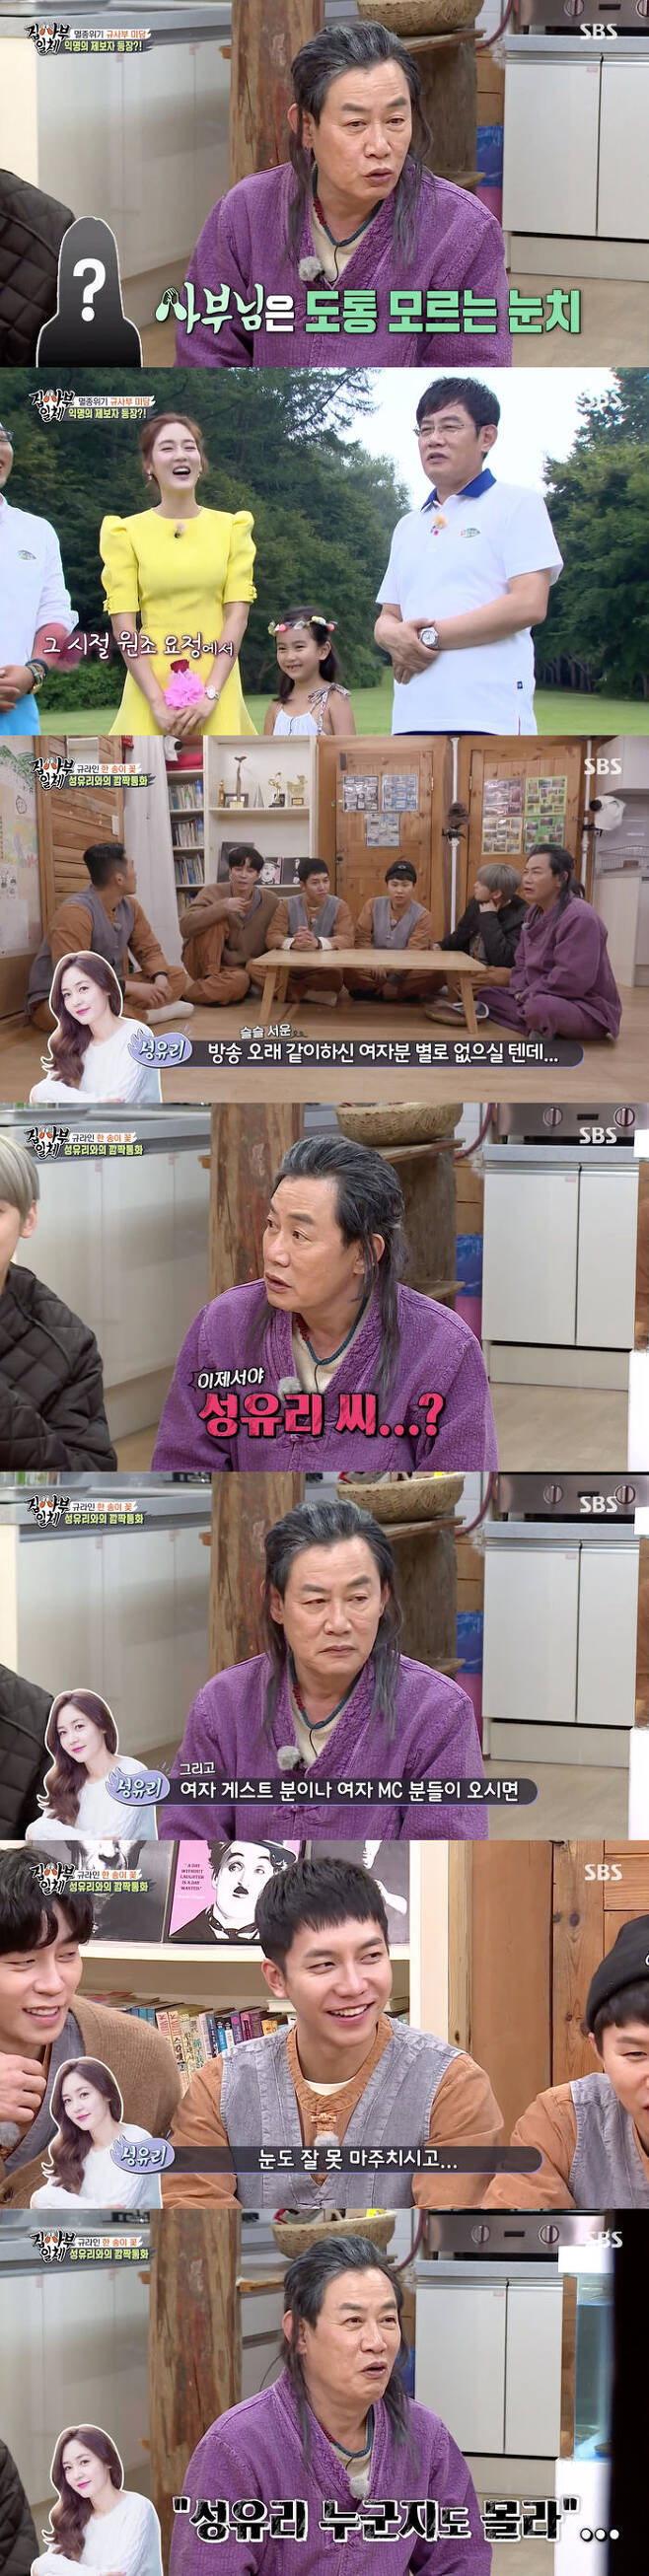 Sung Yu-ri conveyed her wistful heart to Lee Kyung-kyu.On SBS All The Butlers broadcast on the 11th, an anonymous Whistle Blower appeared to reveal the misrepresentation of Master Lee Kyung-kyu.On the show, Lee Kyung-kyu said that he did not know anything about the voice of Whistle Blower.I have been broadcasting with my senior since my debut, and I have been in my debut for over 20 years, said Whistle Blower. I do not think there are many women who have been with me for a long time.We were together for about two years, he explained.Lee Kyung-kyu was still in the middle of the day, and Whistle Blower laughed, I will fold and go in.Lee Kyung-kyu, who heard the laughter of Whistle Blower, caught the eye by noticing the identity of Whistle Blower, Mr. Sung Yu-ri?Sung Yu-ri shivered and said he would look for Mitam about Lee Kyung-kyu, making Lee Kyung-kyu feel sick.And Sung Yu-ri said, In fact, you direct your own image of a bad villain, but it is a softie inside. If you can not meet your eyes and MCs come, you run away.The members asked if it was a misdemeanor, and Lee Kyung-kyu said, Shut up.Sung Yu-ri said, When you broadcast with me, you said you only knew me and Han Hye-jins contact information. After that, I saw a senior who was entertaining with Kim Min-jung.I was so sad, he laughed, revealing his true heart.Finally, the members asked Lee Kyung-kyu to say that he loved his junior Sung Yu-ri, and Lee Kyung-kyu blushed and gave a message to his junior that he loved him.